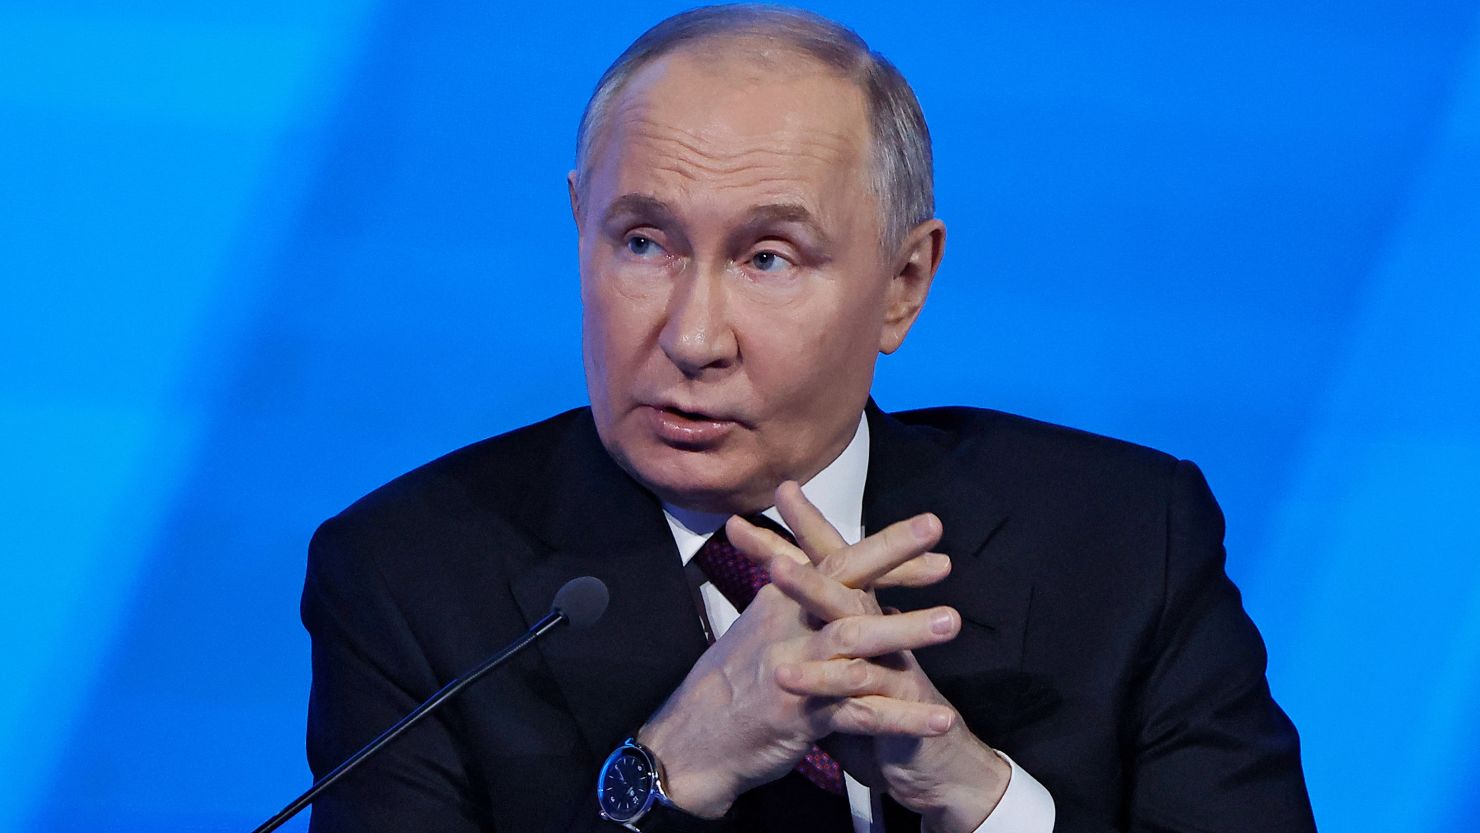 Russian President Vladimir Putin has repeatedly made veiled threats about using nuclear weapons.